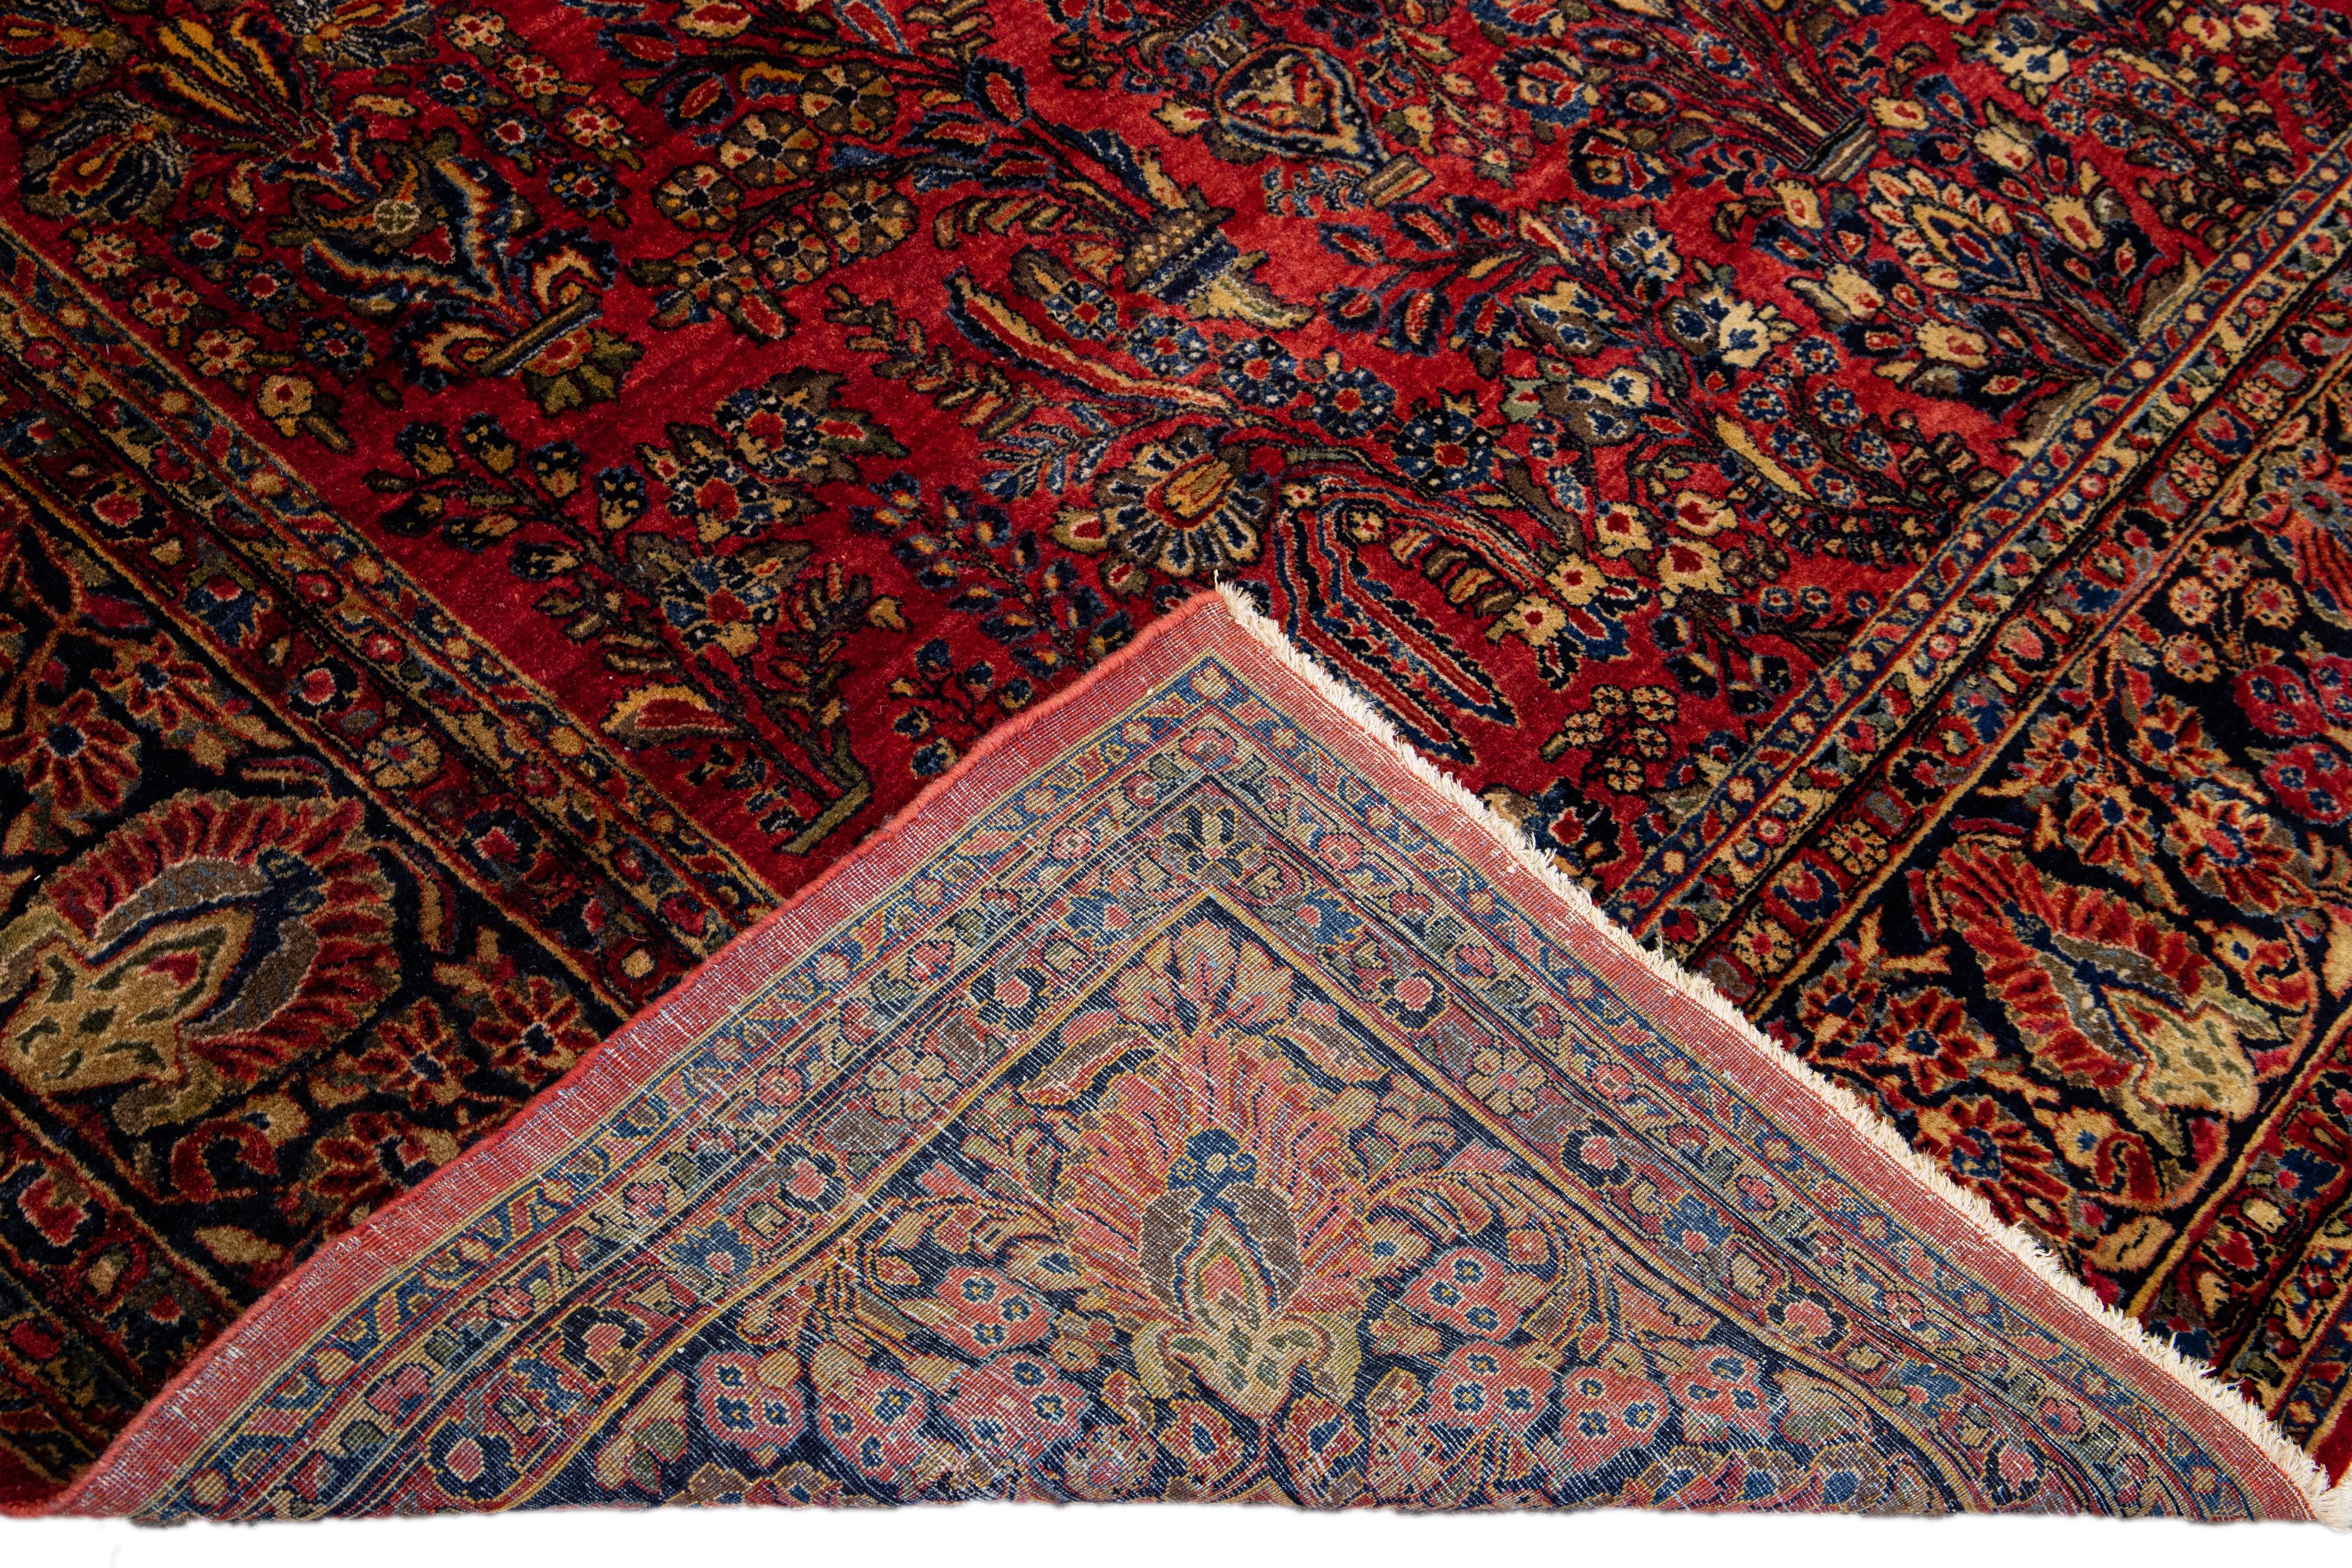 Beautiful antique Sarouk Persian hand-knotted wool rug with a red field. This Persian rug has a designed frame and blue, green, and brown accents in a gorgeous all-over traditional floral design. 

This rug measures: 10'5